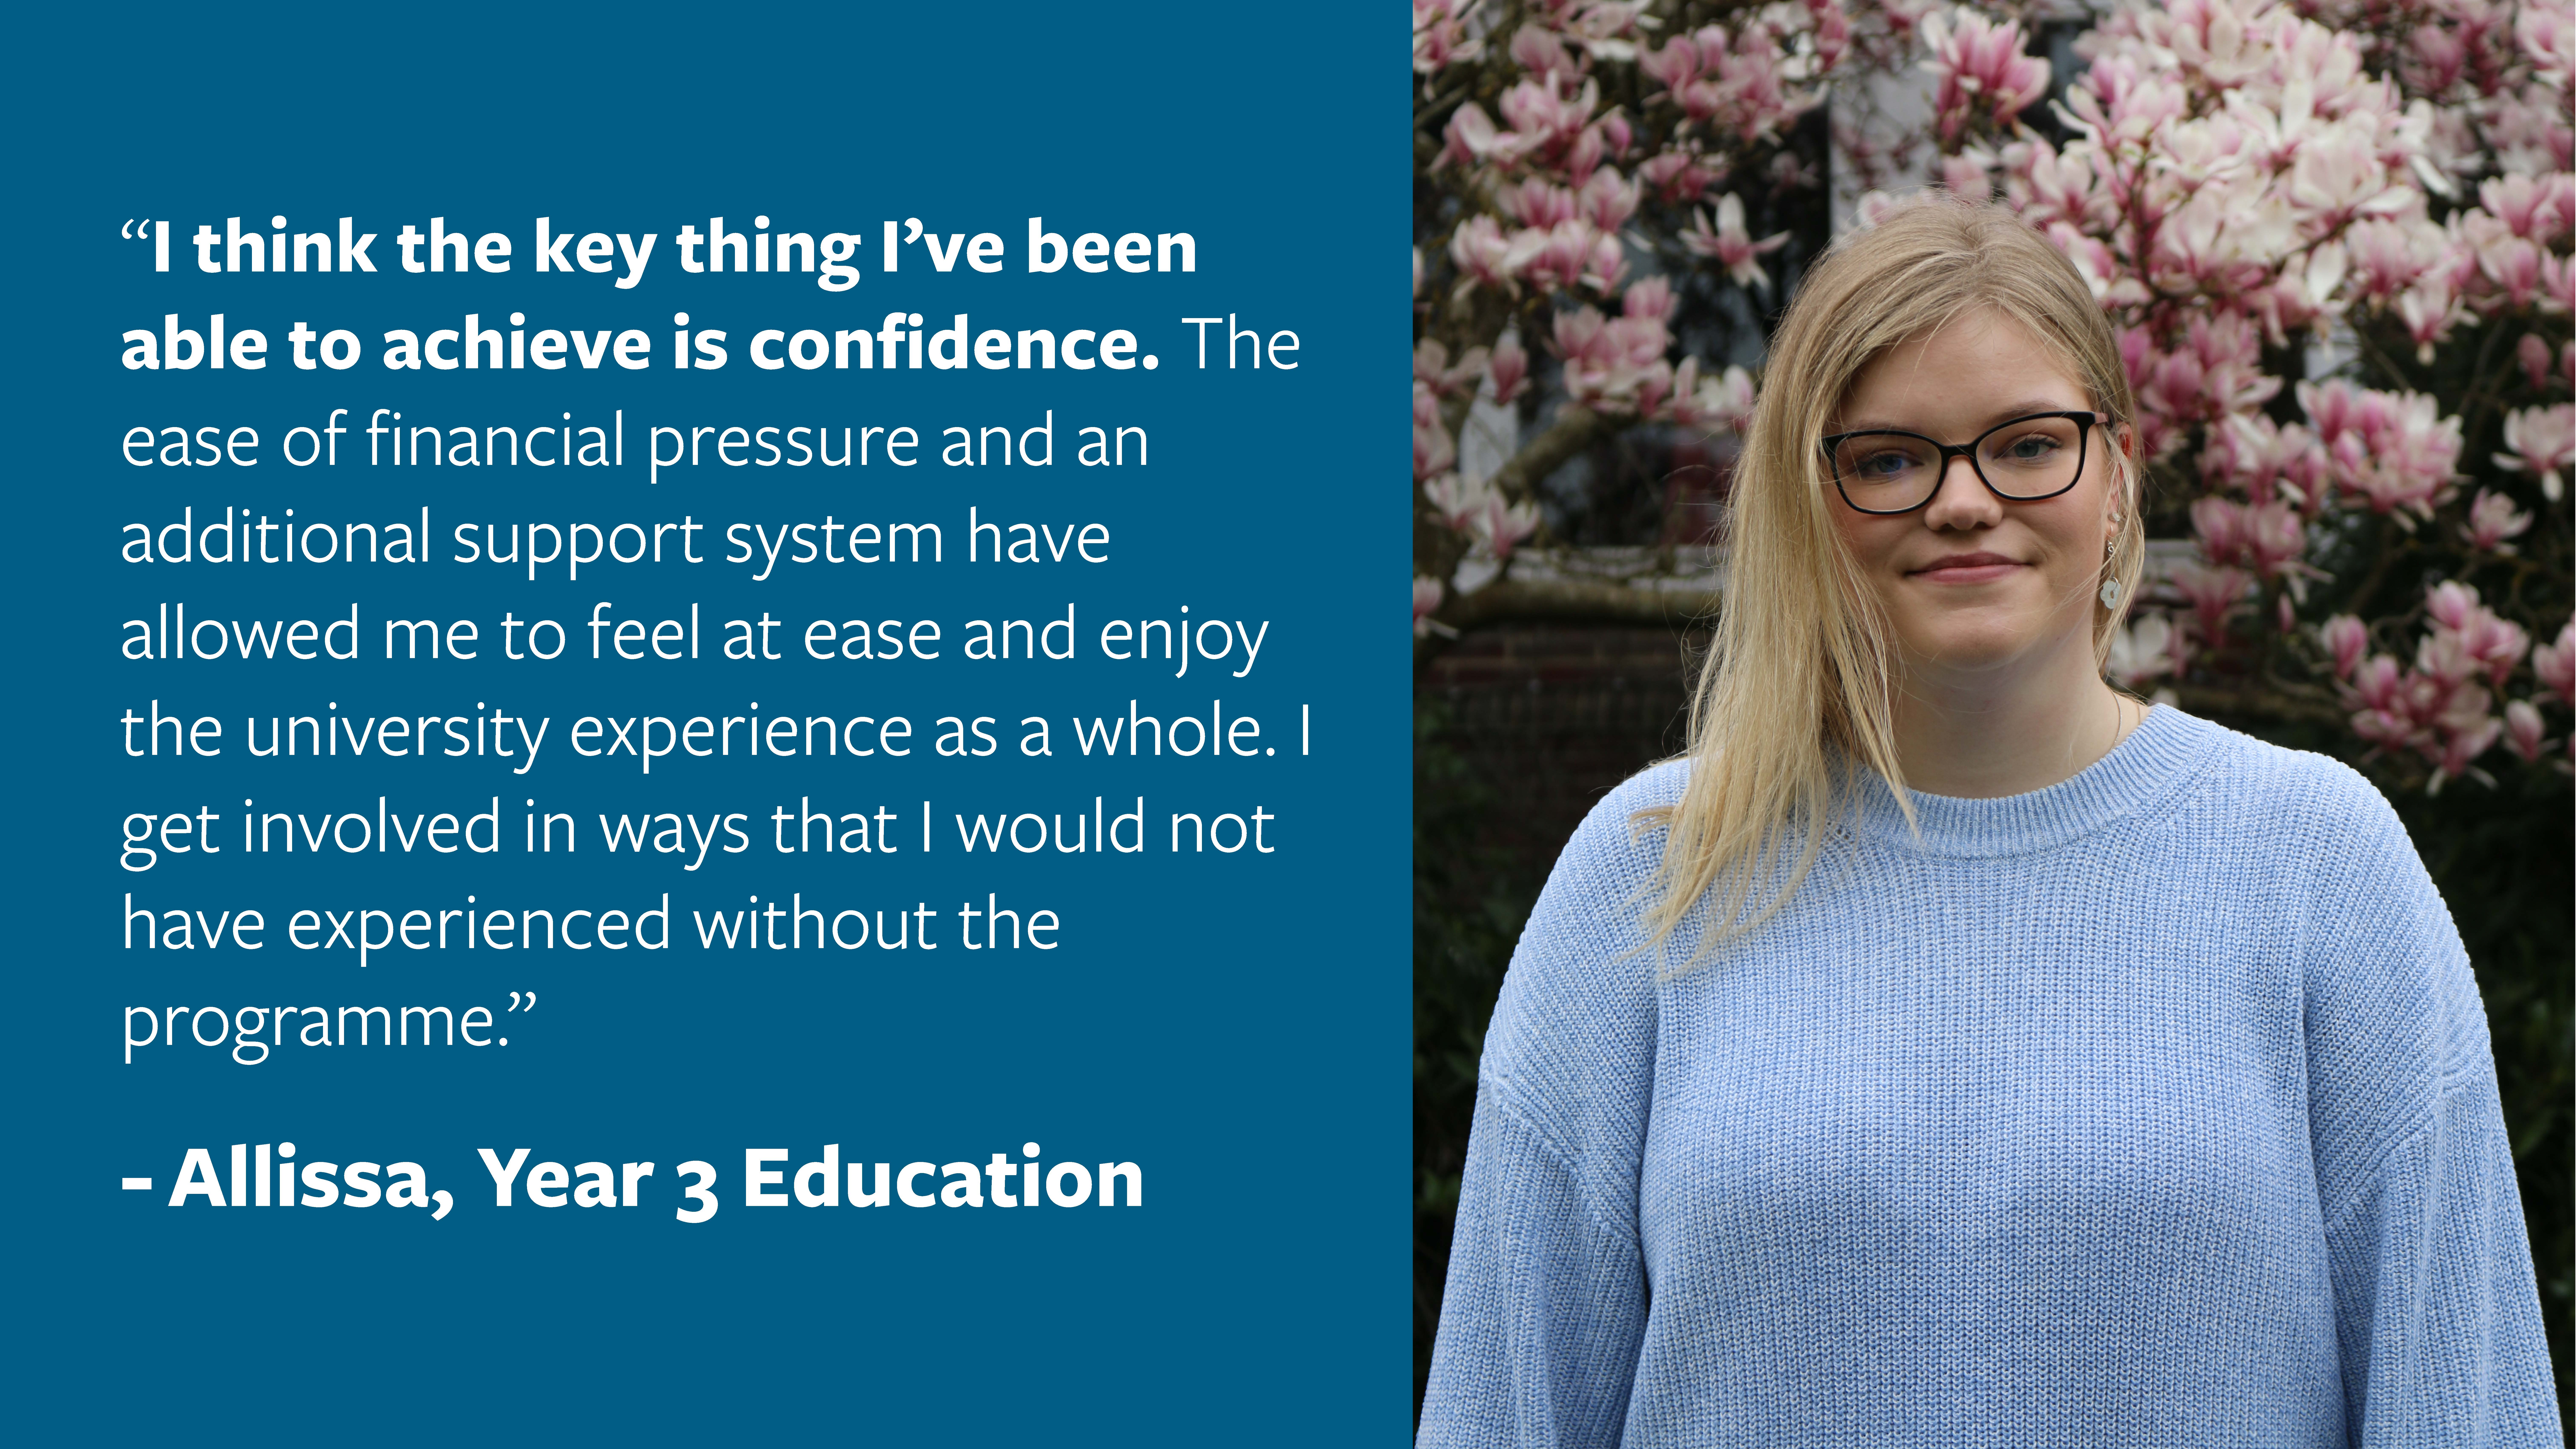 A Photo of Allissa stood in front of a magnolia tree. On the left on a University blue background is a quote that explains how Ignite has had a positive impact on Allissa's university experience.